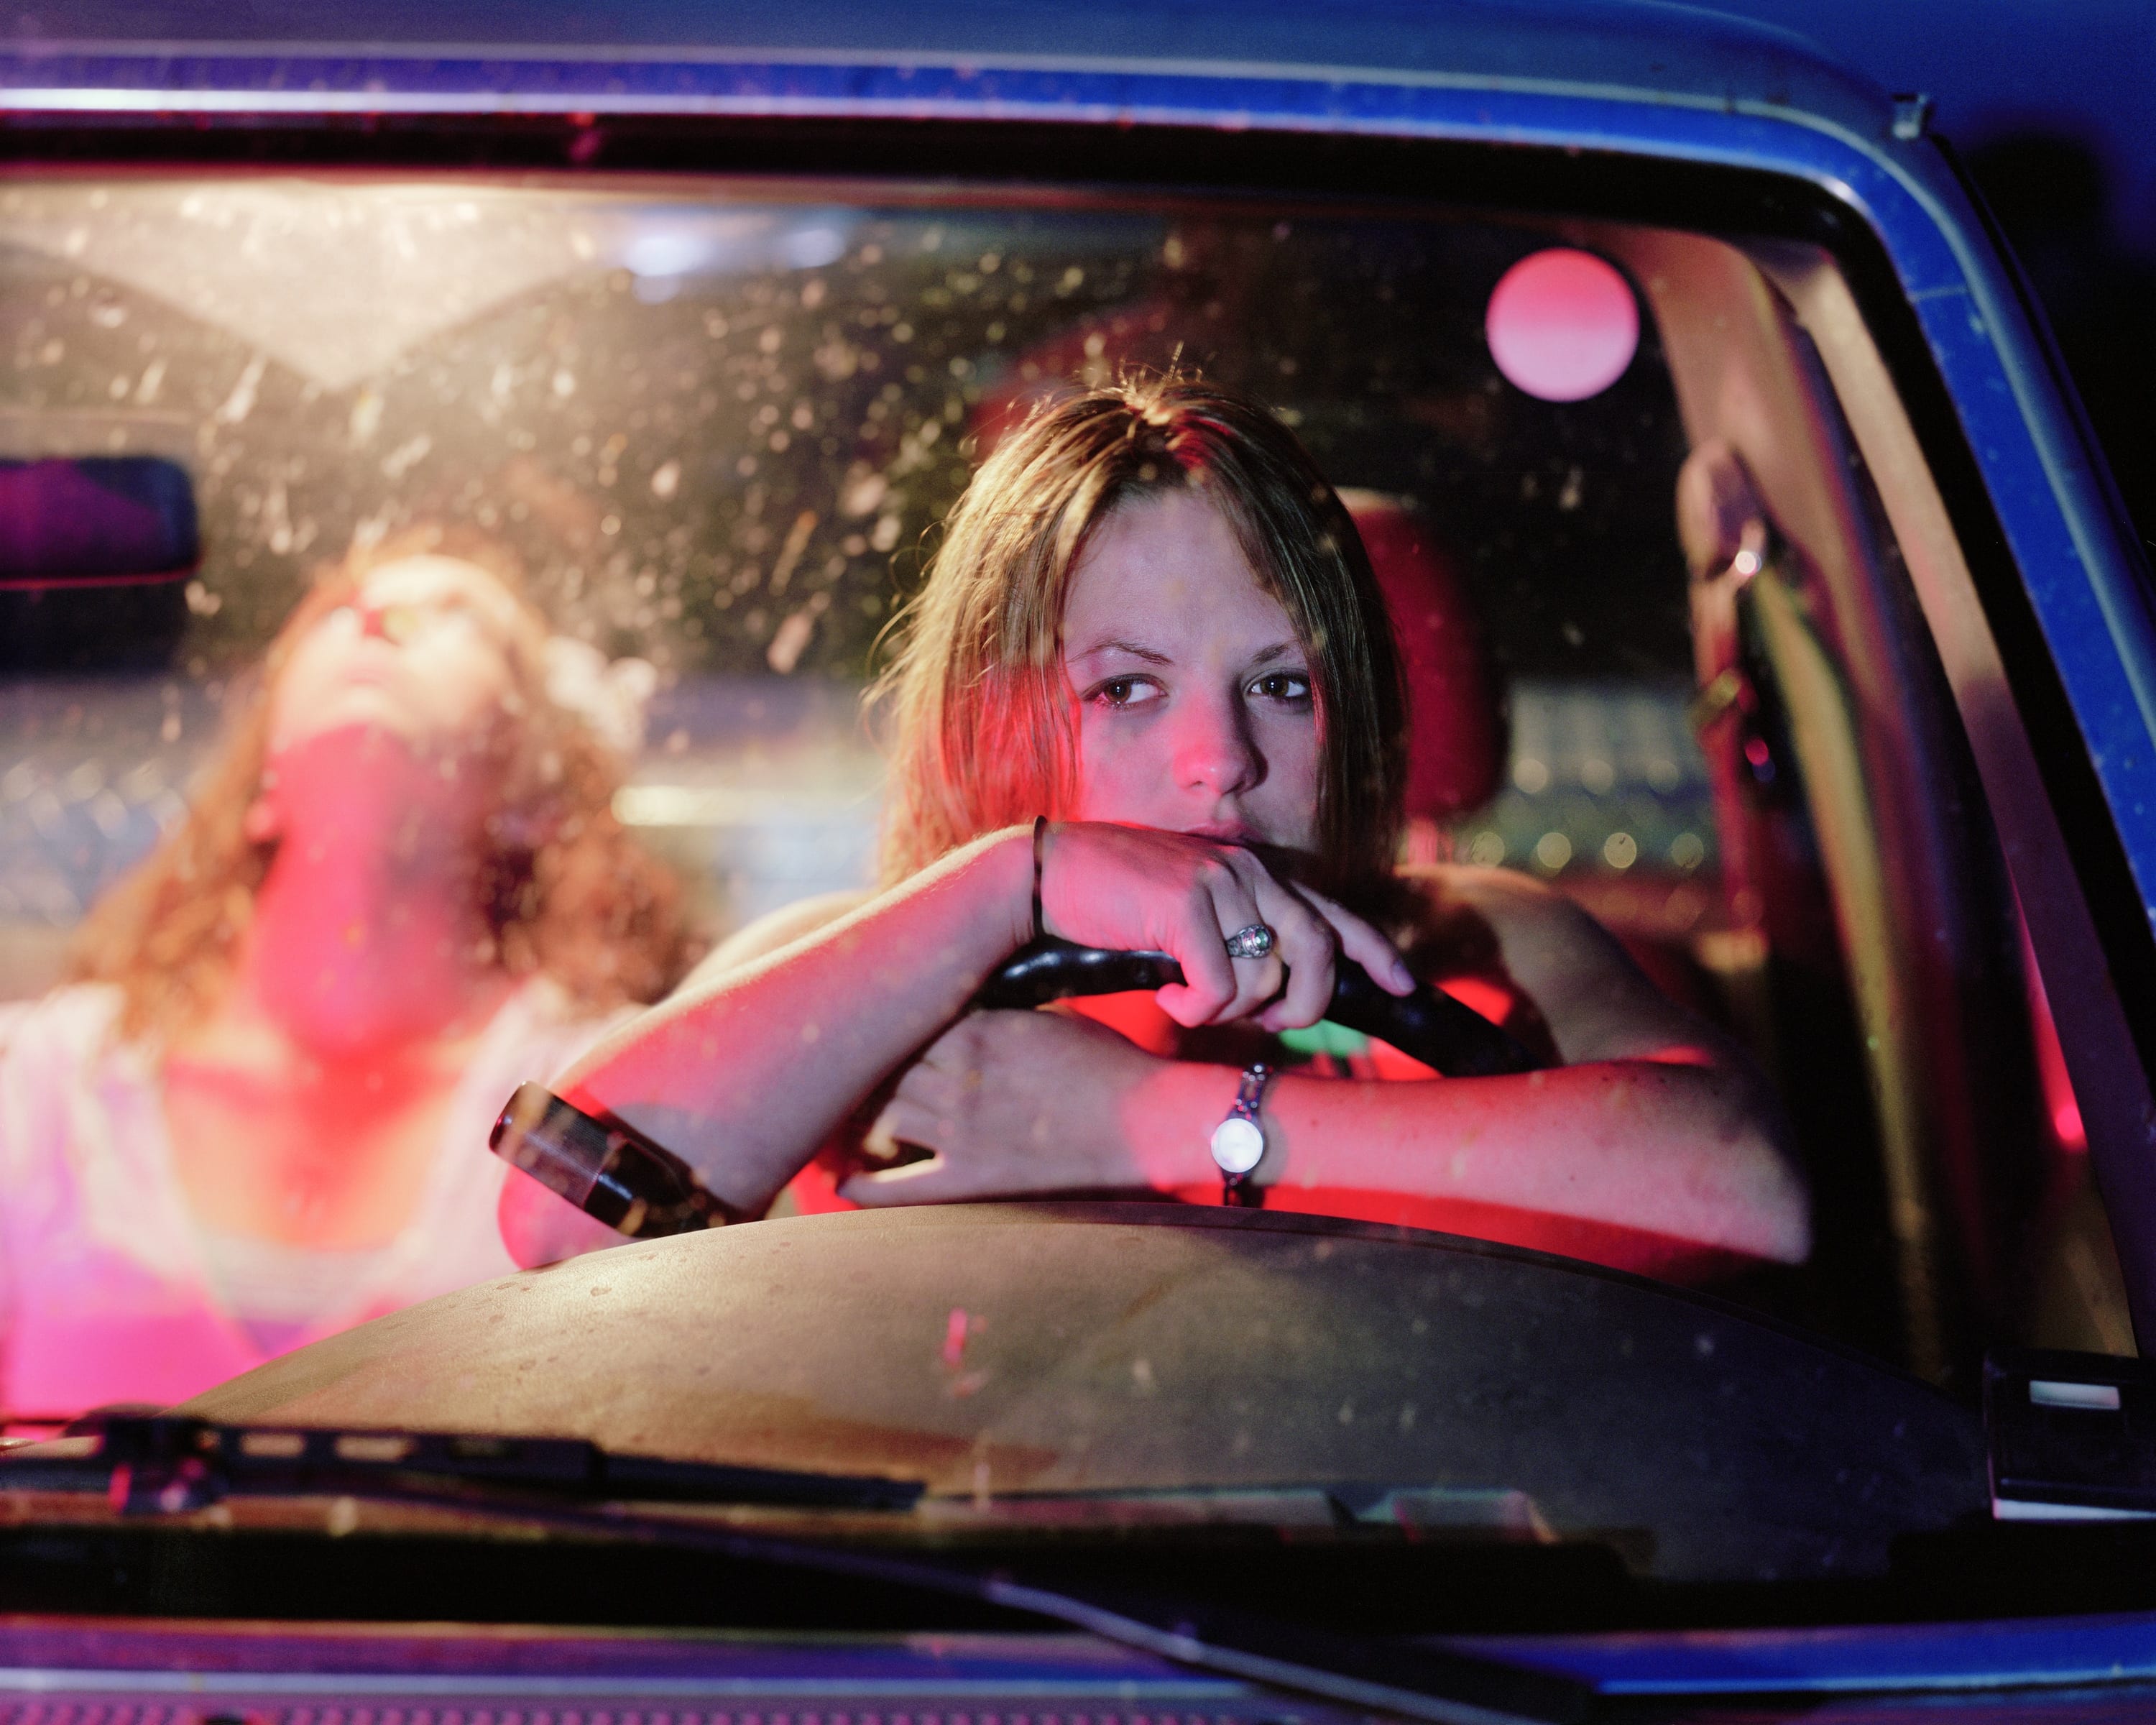 Angela Strassheim Untitled (Girls in Pickup), 2006. The artist and Andrea Meislin Gallery 